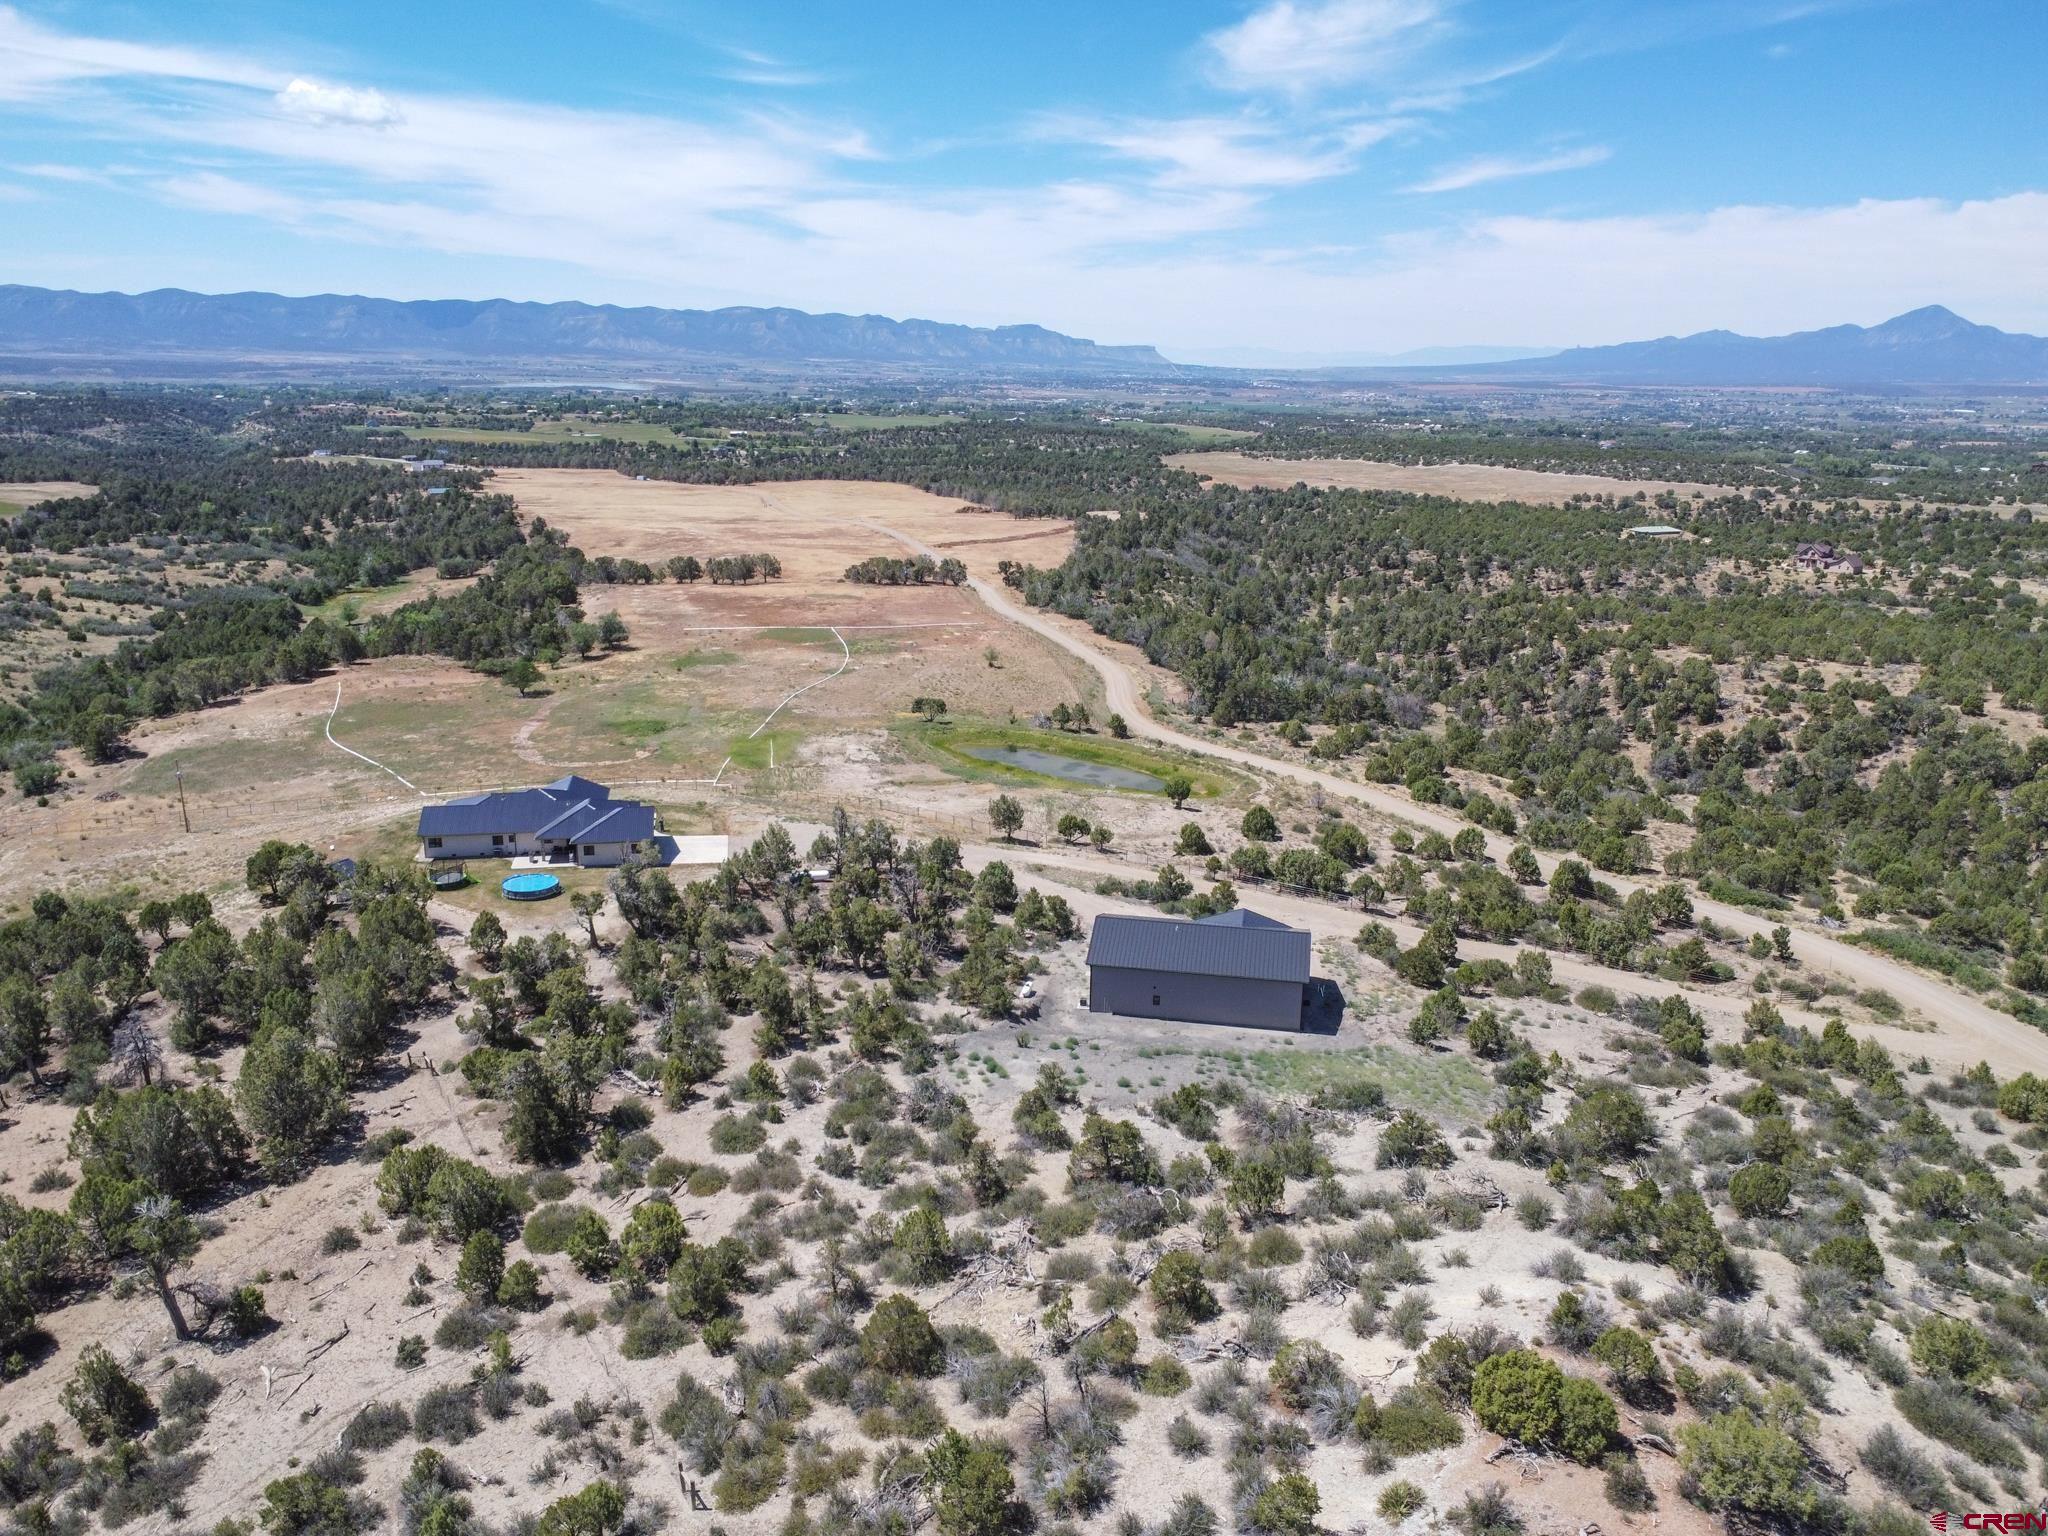 “On Top of The World” is how to describe this exceptional property with breathtaking views of Southwest Colorado!  Where to begin… this 35 acre property is located in Black Rhino Ranch subdivision enclosed with a custom piped-cabled fence around the entire property.  Flood irrigation system is setup with irrigation water rights including one share of Summit Irrigation.  This ranch style custom home has everything you would want and more.  This 4 bed / 2.5 bath 2800 + sq. ft. home has many highlights with custom stamped concrete sidewalks and a covered front porch to sit and enjoy those tranquil Colorado sunsets. The floor plan is open and inviting with high ceilings, custom laminate flooring and carpet in the sleeping area’s of the home.  Kitchen is equipped with Samsung appliances, custom satin granite with Crestwood cabinetry.  The master bedroom is located on the east side of home to capture the morning sunrise with an oversized walk-in closet and en suite master bathroom.  Enjoy a soak in your Gloria free standing tub or have extra room in the walk-in rock floor double head shower.  If you have animals you would like to bathe, well they have their own shower too, located next to the double car attached garage.  No need to haul around hoses and sprinklers all day, because the property is set-up with Rain Bird underground automatic sprinkler system.  Let’s not forget about the shop and “Man Cave” just built in 2021.  Custom cars, boats, campers, and all-terrain vehicles can all be stored in the 40” x 40” heated garage with epoxy concrete floors for easy clean-up.  With the shop comes your very own “Man Cave” to entertain your friends with a game on TV or a night of poker.  The shop also has instant hot water heater, bedroom, bathroom and extra storage space.  There are two separate septic systems for the home and shop.  You may never want to leave this property, but keep in mind you are conveniently located to great outdoor recreation areas like Telluride, Durango, Moab, Mesa Verde National Park, San Juan National Park, McPhee Reservoir and Phil’s World.